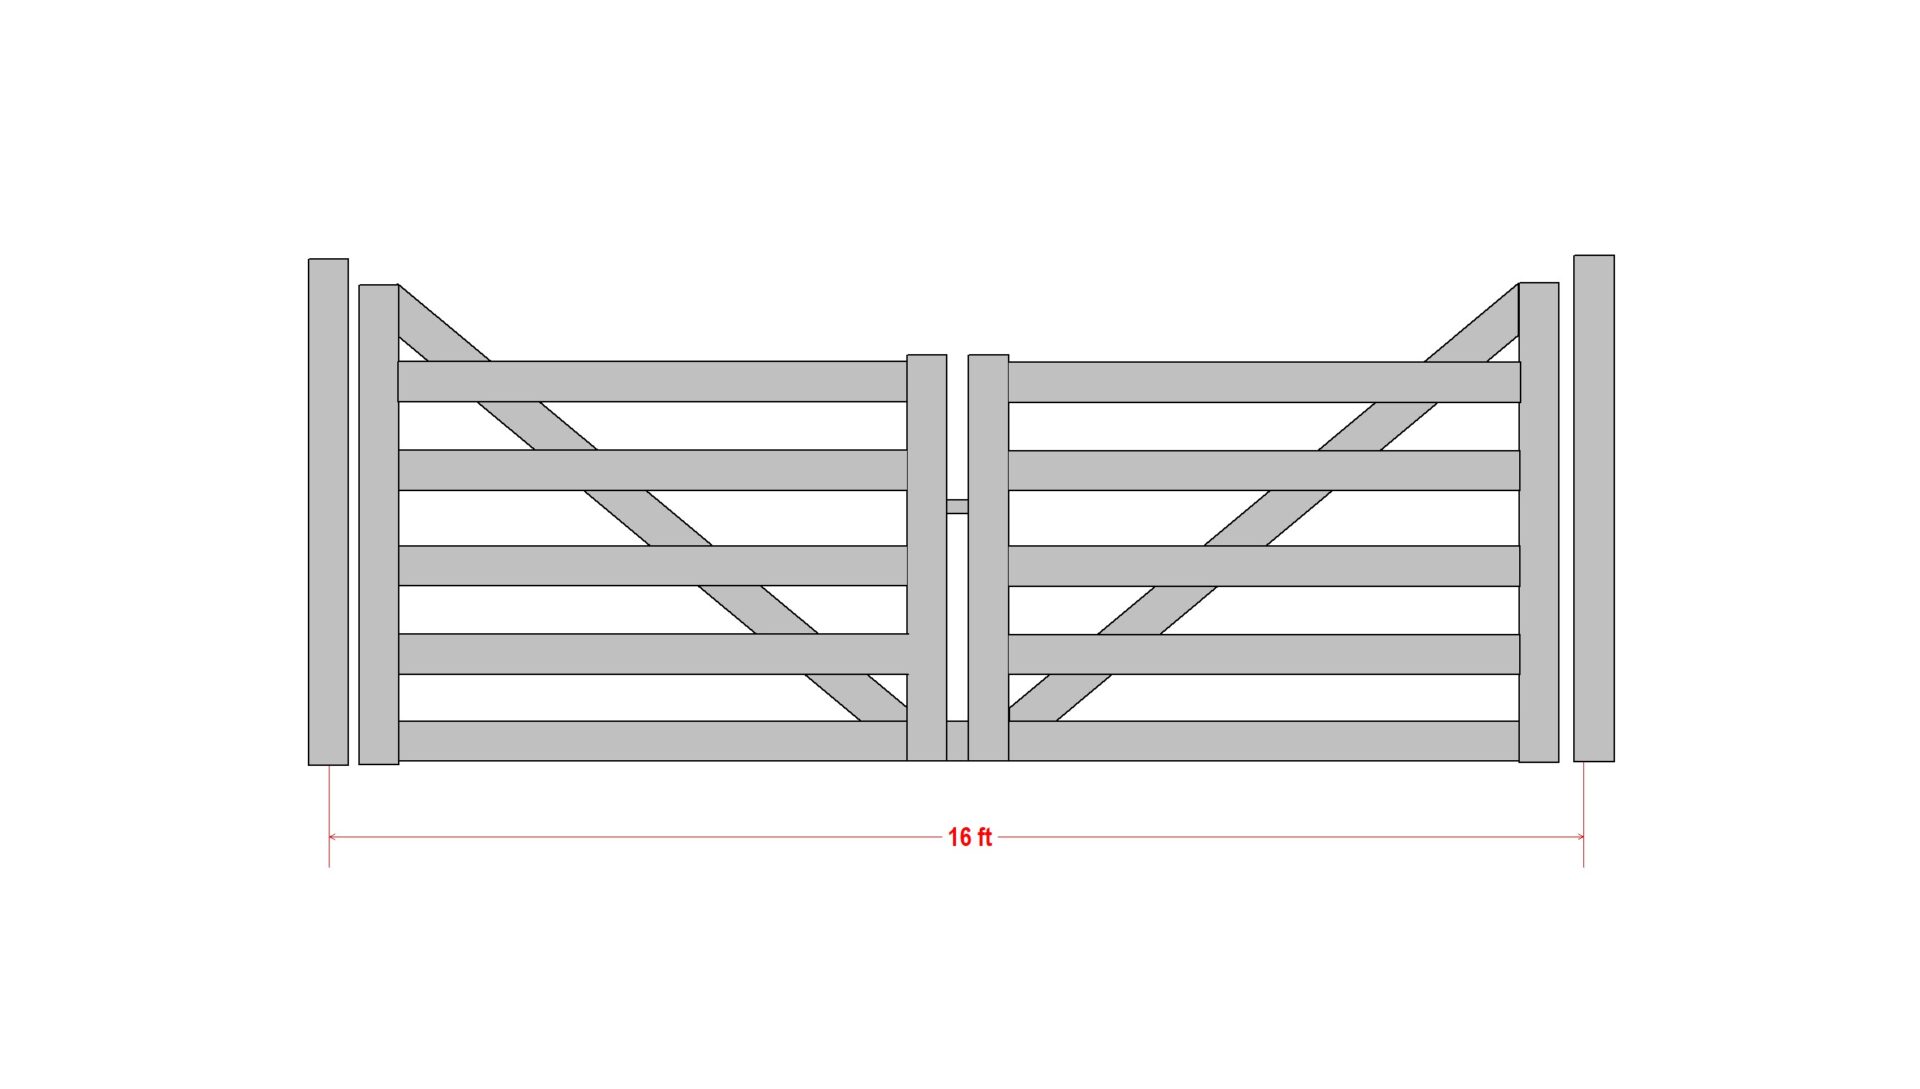 A drawing of the front view of an open gate.